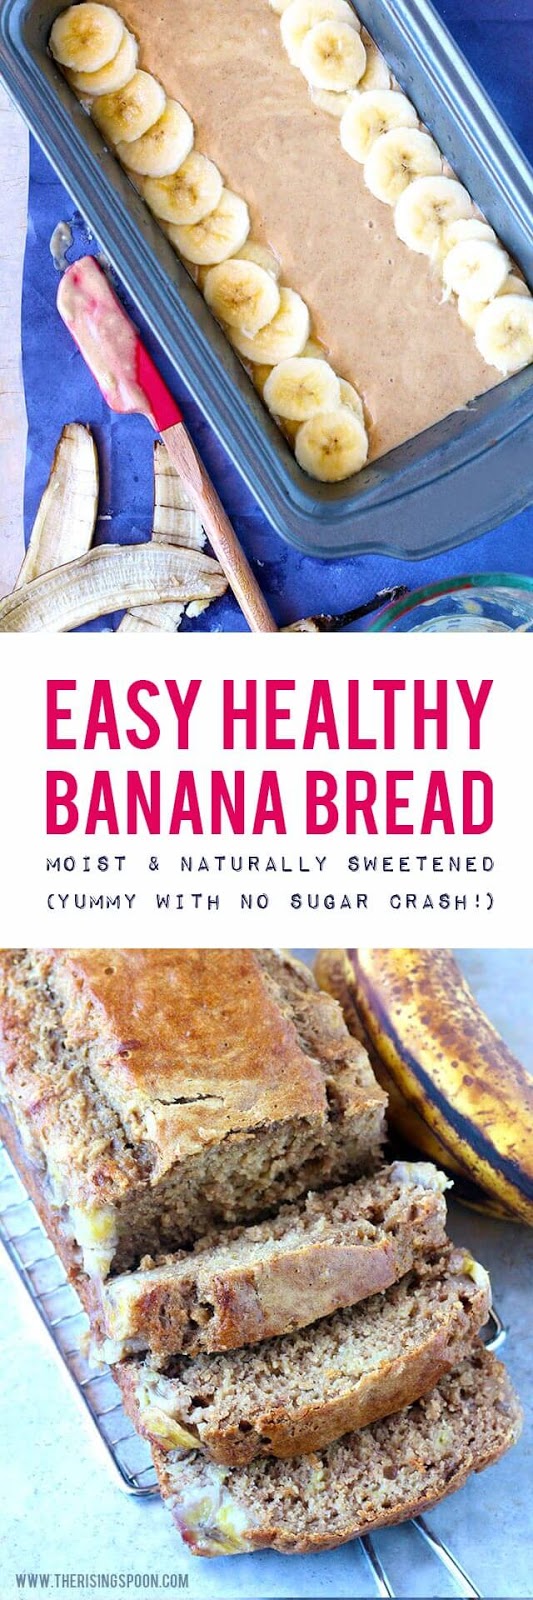 A healthy real food banana bread recipe made with a natural sweetener and higher protein flour so you can enjoy a slice or two of moist & fragrant banana bread any time of the day without going overboard on sugar. (Dairy-Free)